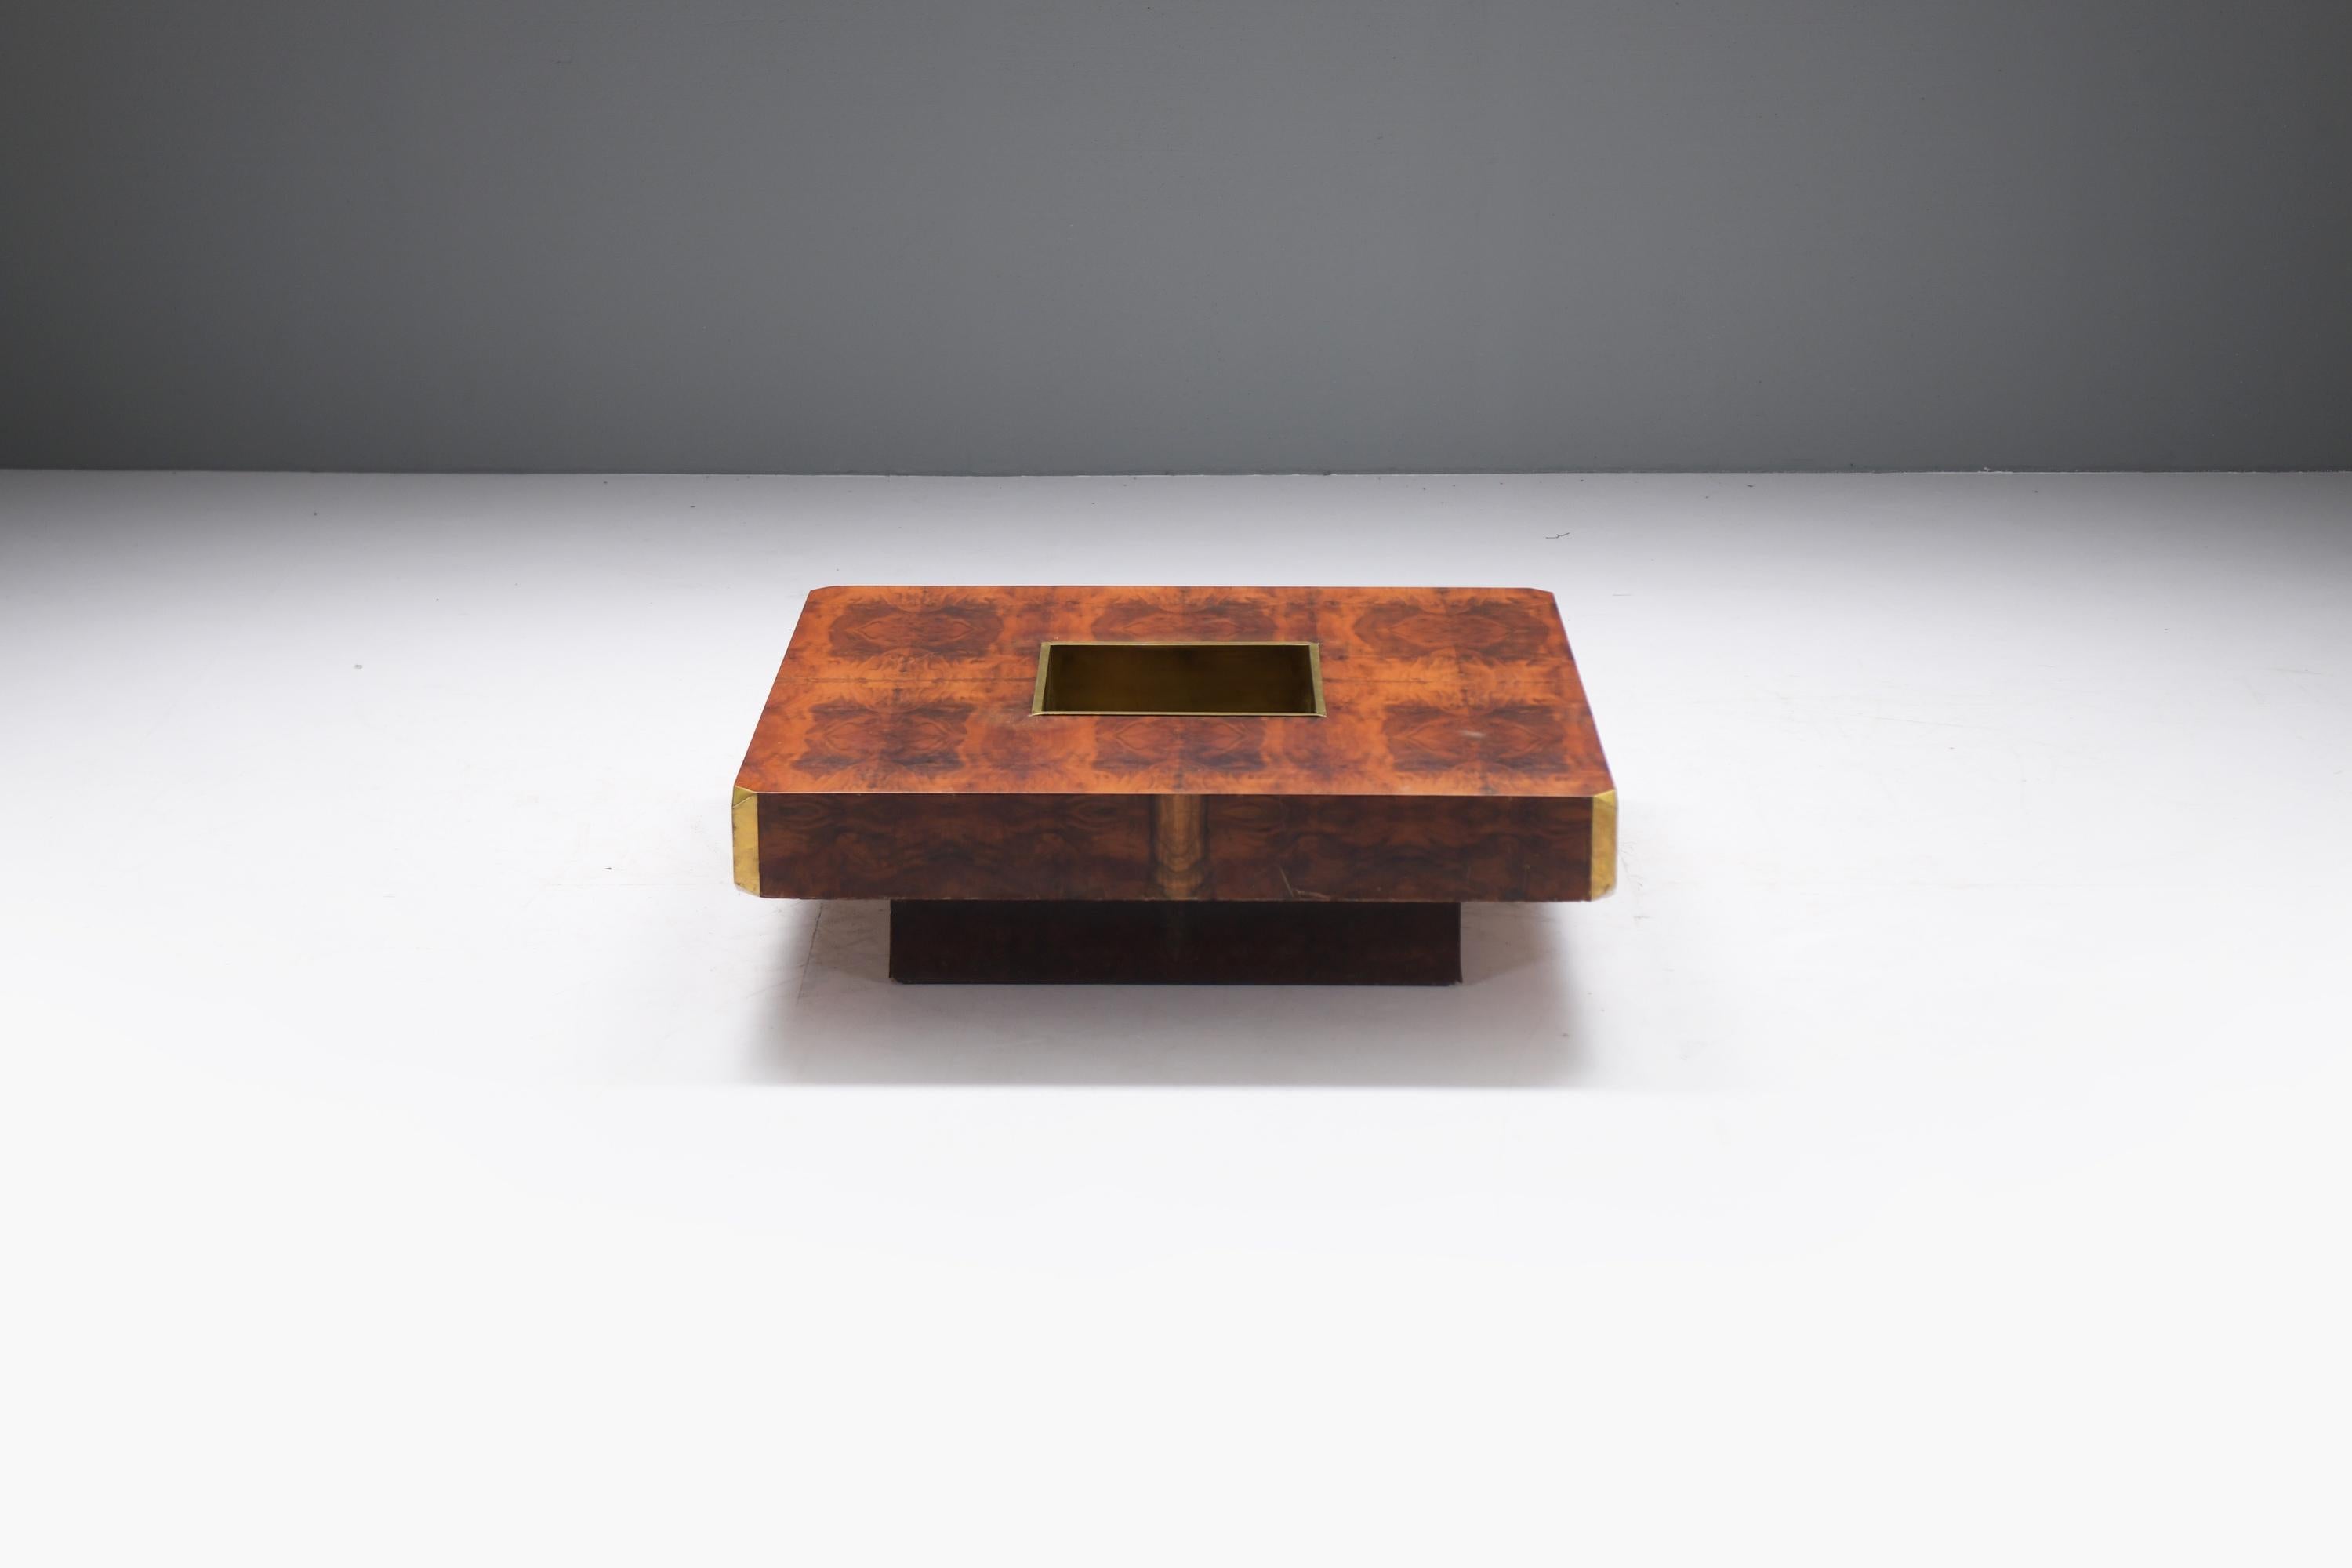 Stunning vintage Willy Rizzo coffee table in burl walnut veneer.  A brass dry bar in the middle and brass detailed corners.
Designed by Willy Rizzo and manufactured by Mario Sabot, Italy 1972 l Aèra-lab Belgium

The table originally was retailed by